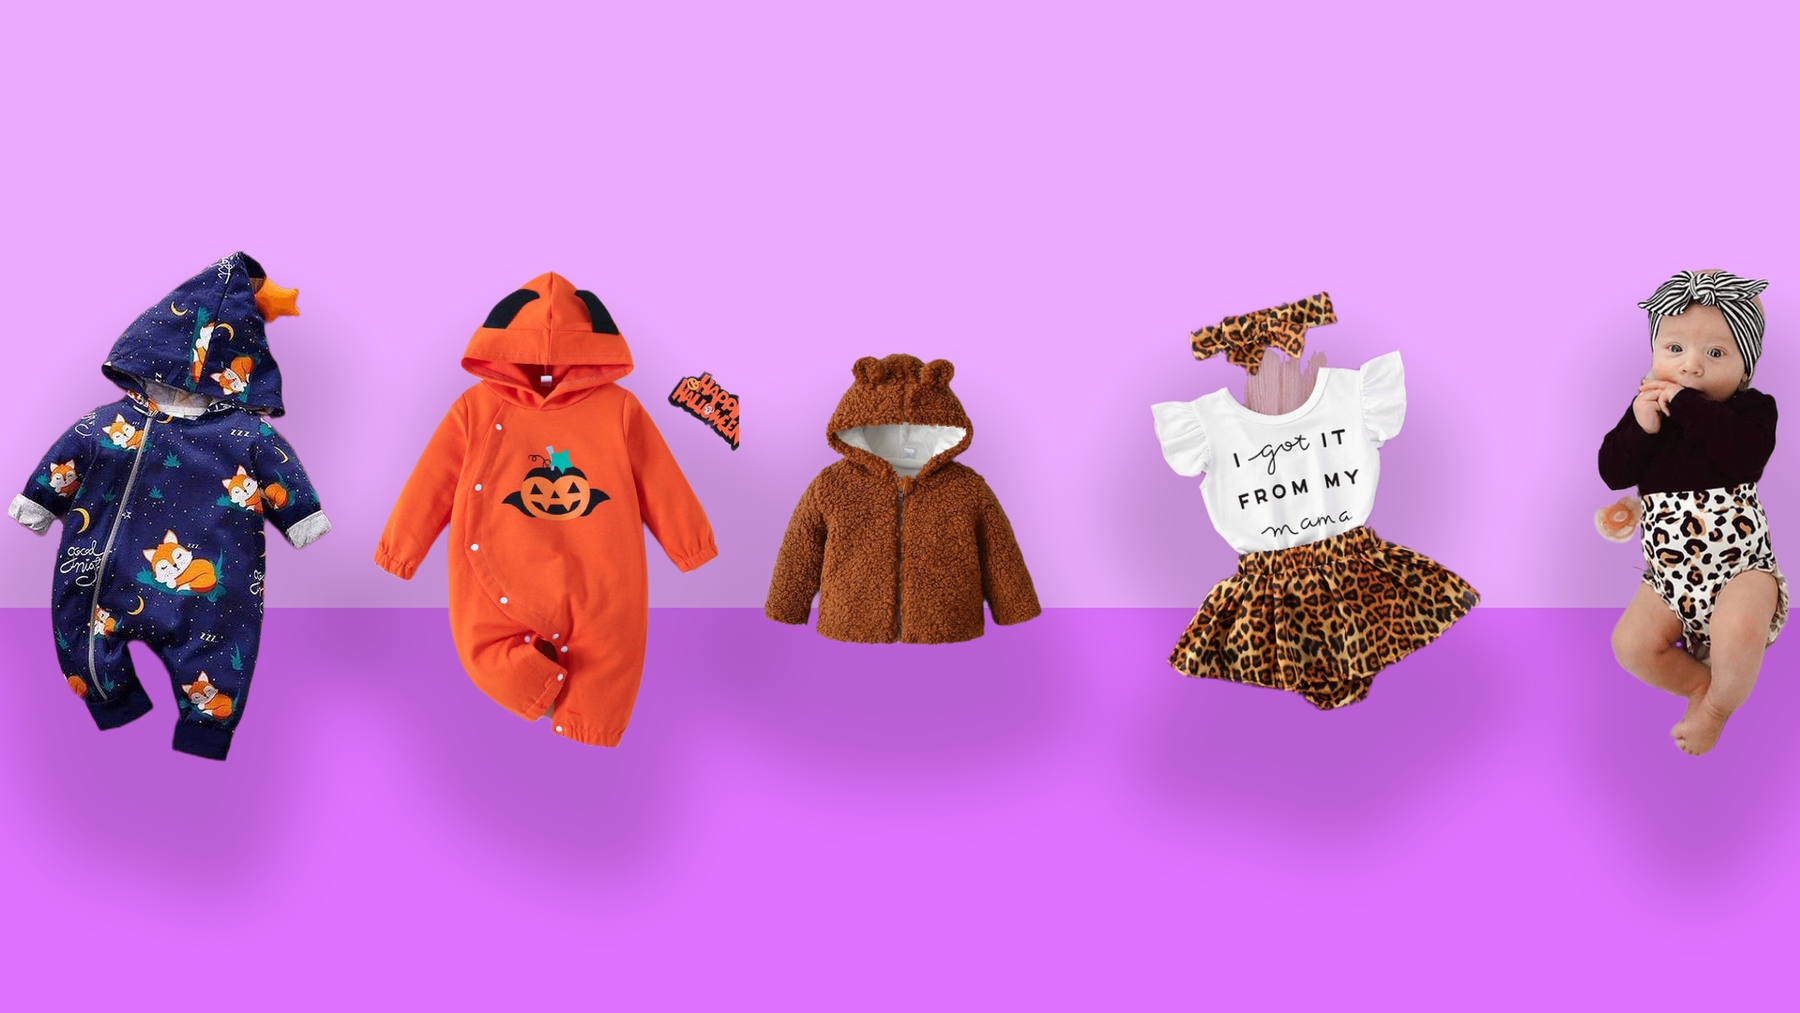 The Top 5 Adorable Baby Girl Costumes That Will Steal Your Heart